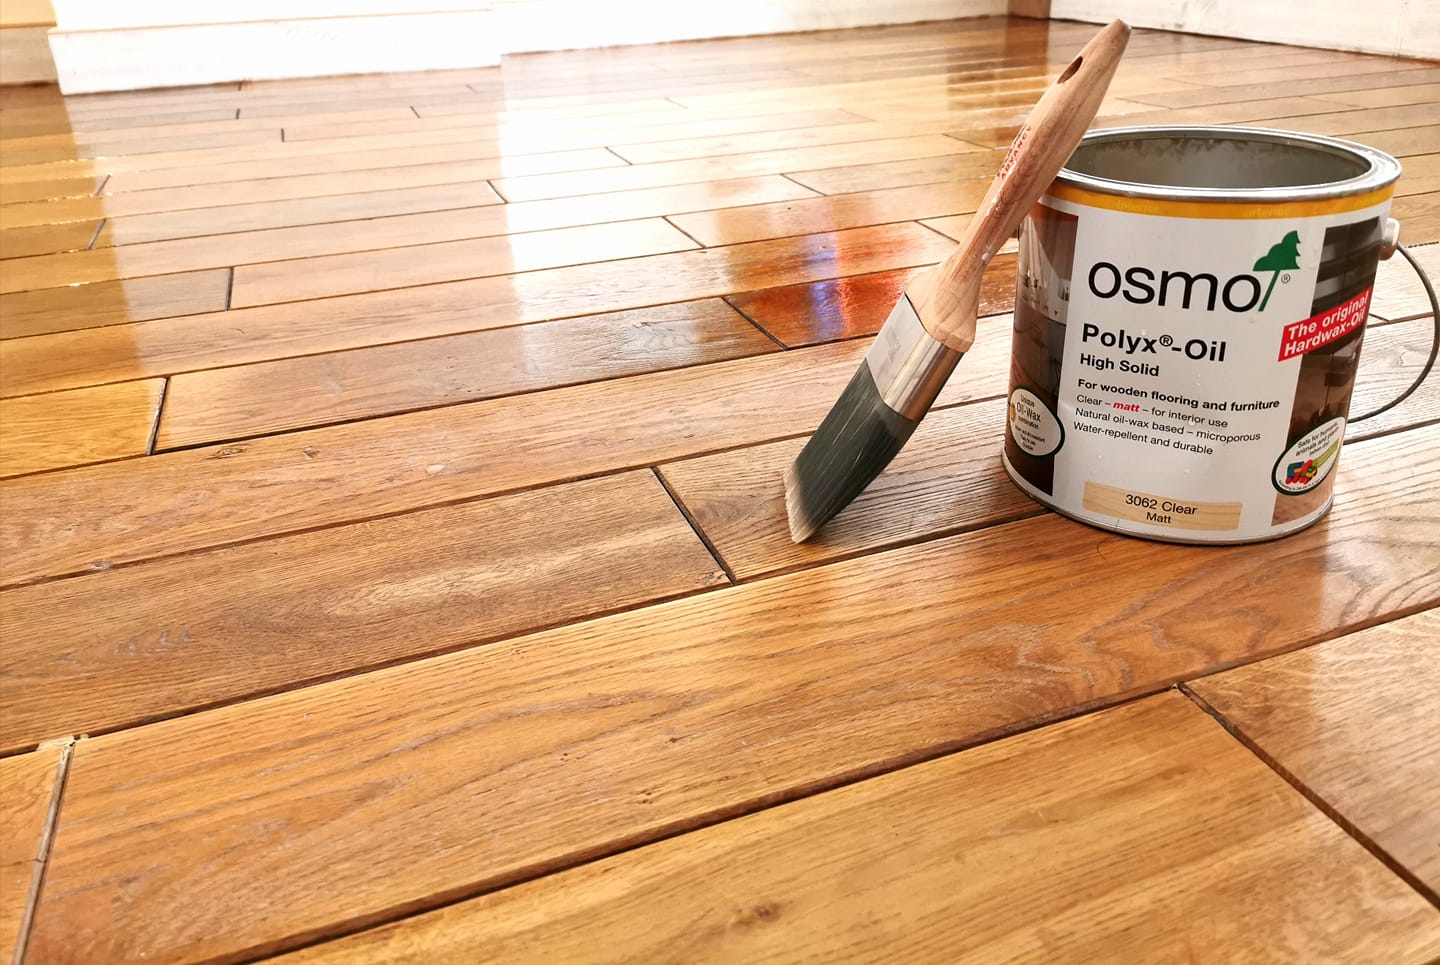 How to apply osmo polyx-oil to the floors in your home or business.